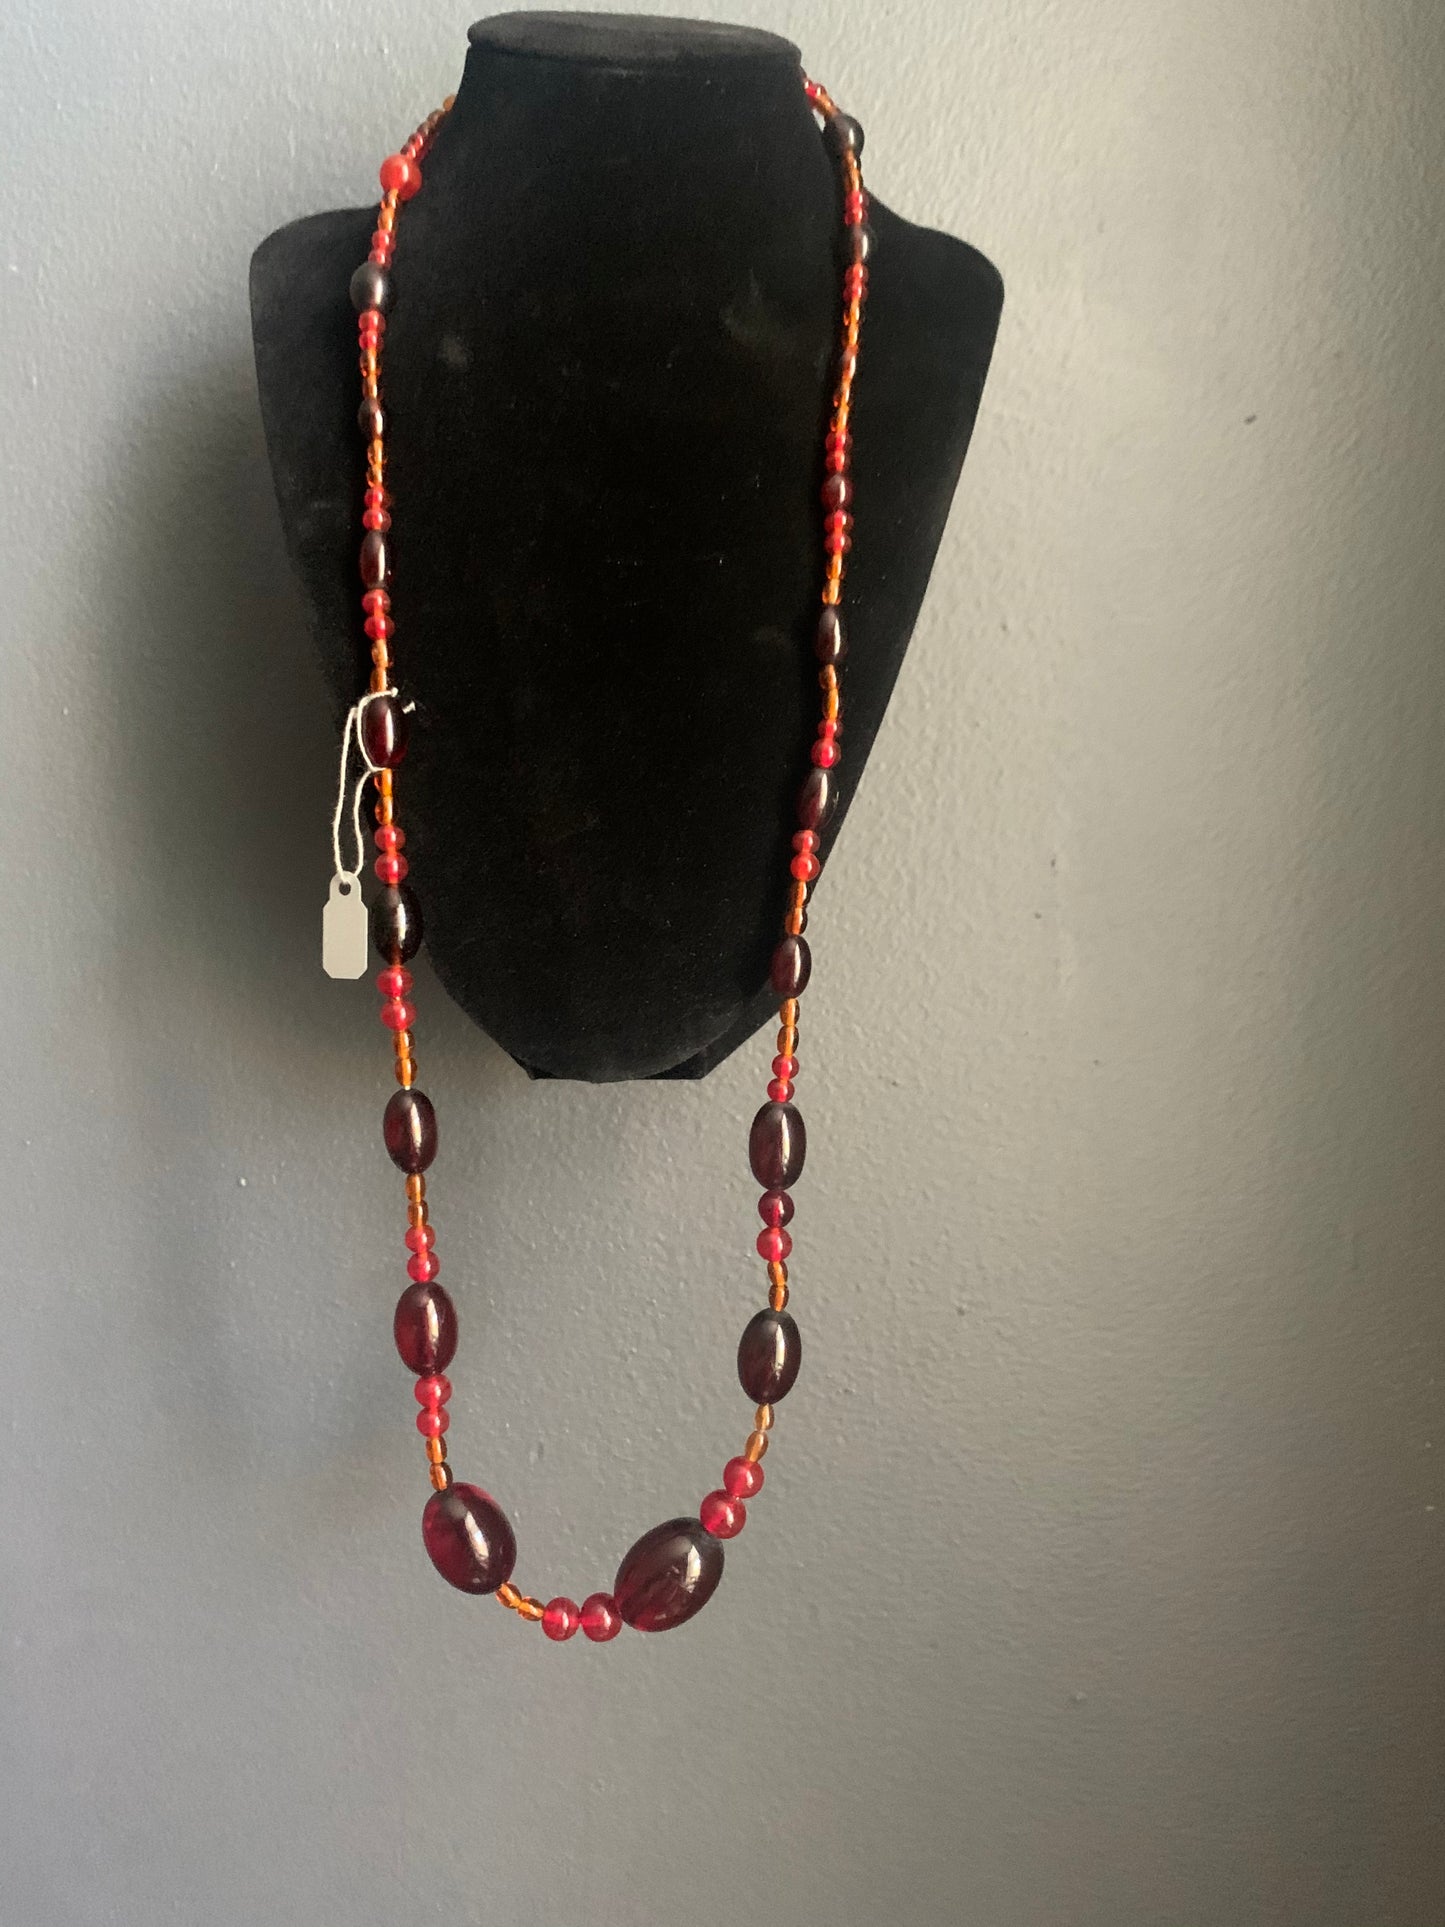 A faux amber necklace